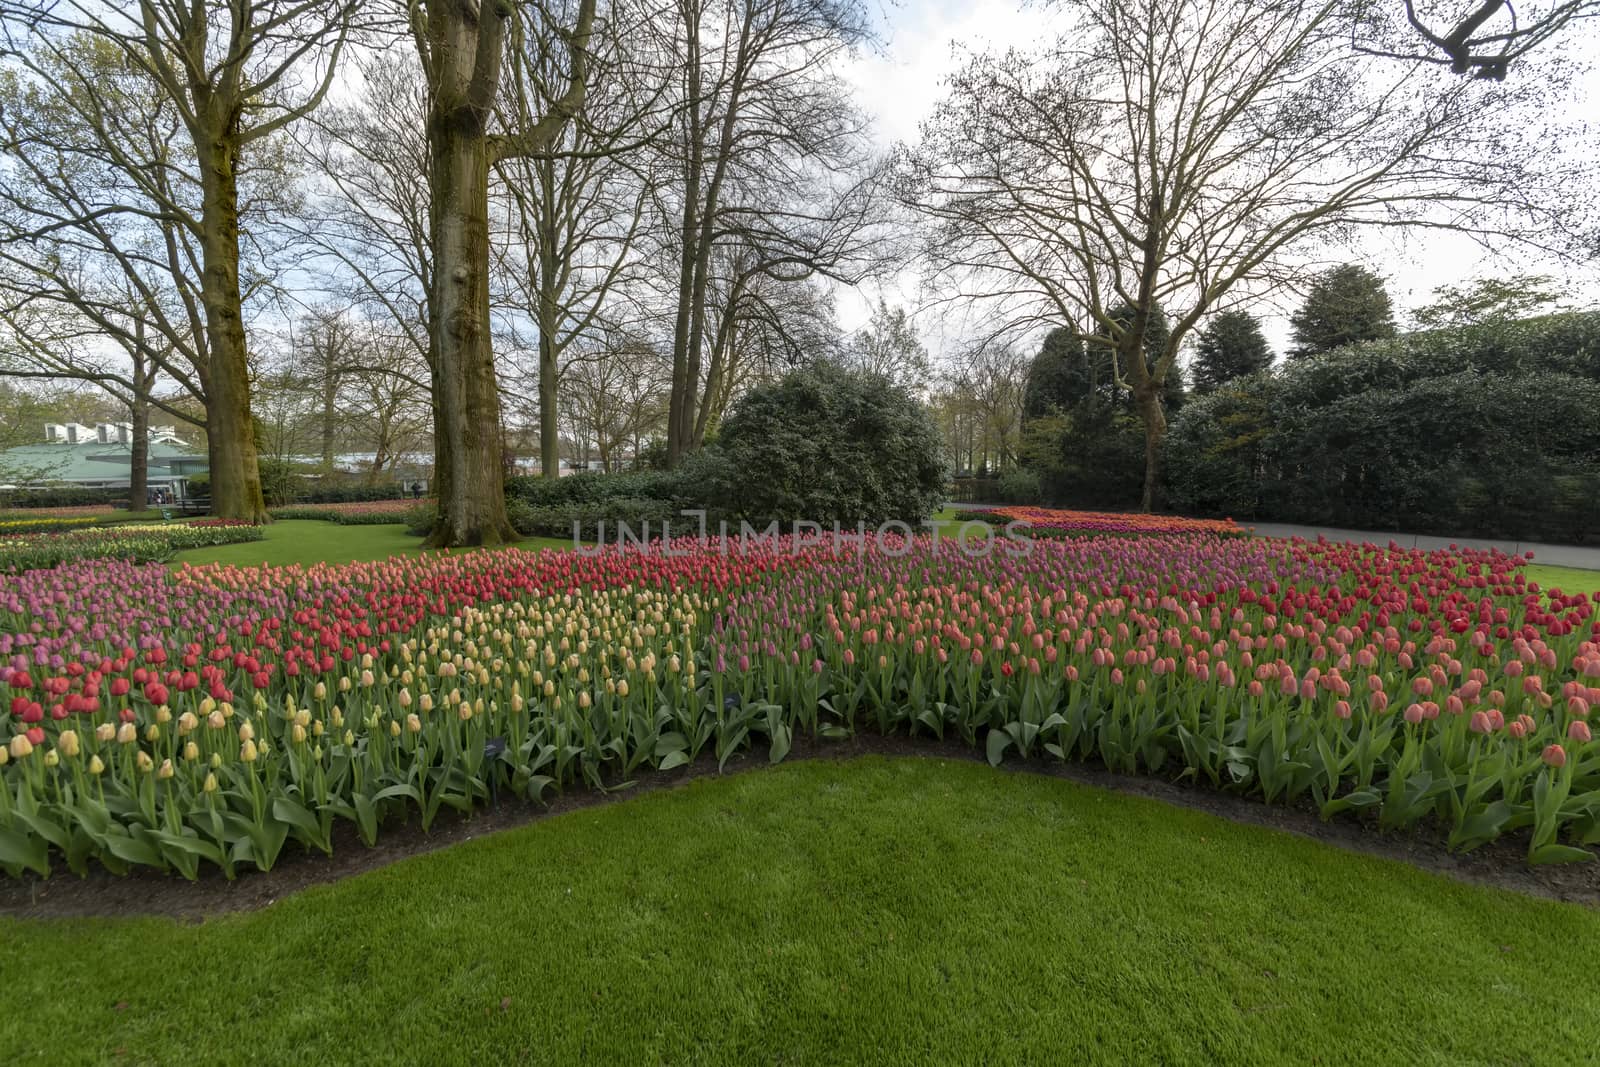 Yellow Daffodil and multi color tulips blossom blooming under a very well maintained garden in spring time